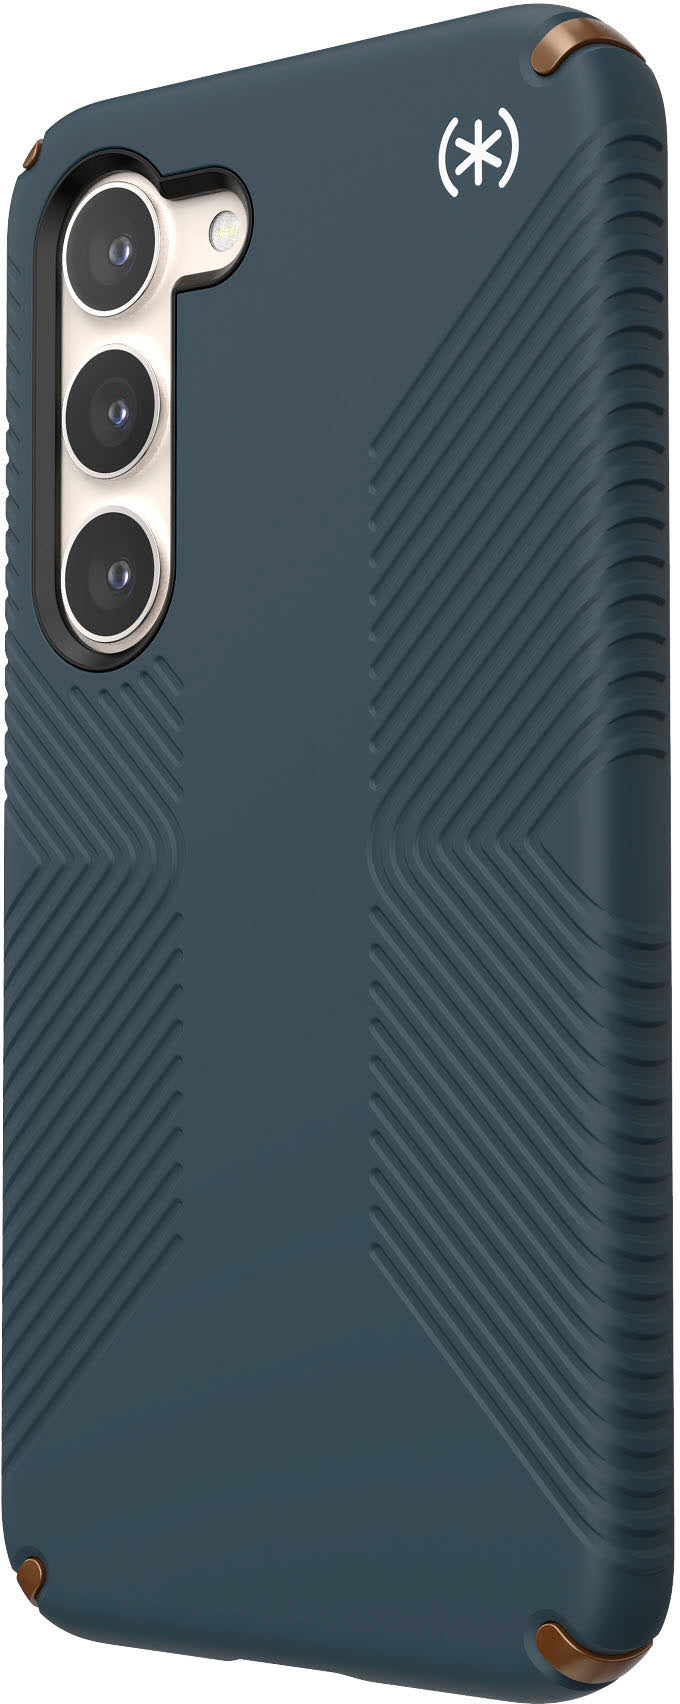 Speck - Presidio2 Grip Case for Samsung Galaxy S23 - Charcoal Grey/Cool Bronze/White_1